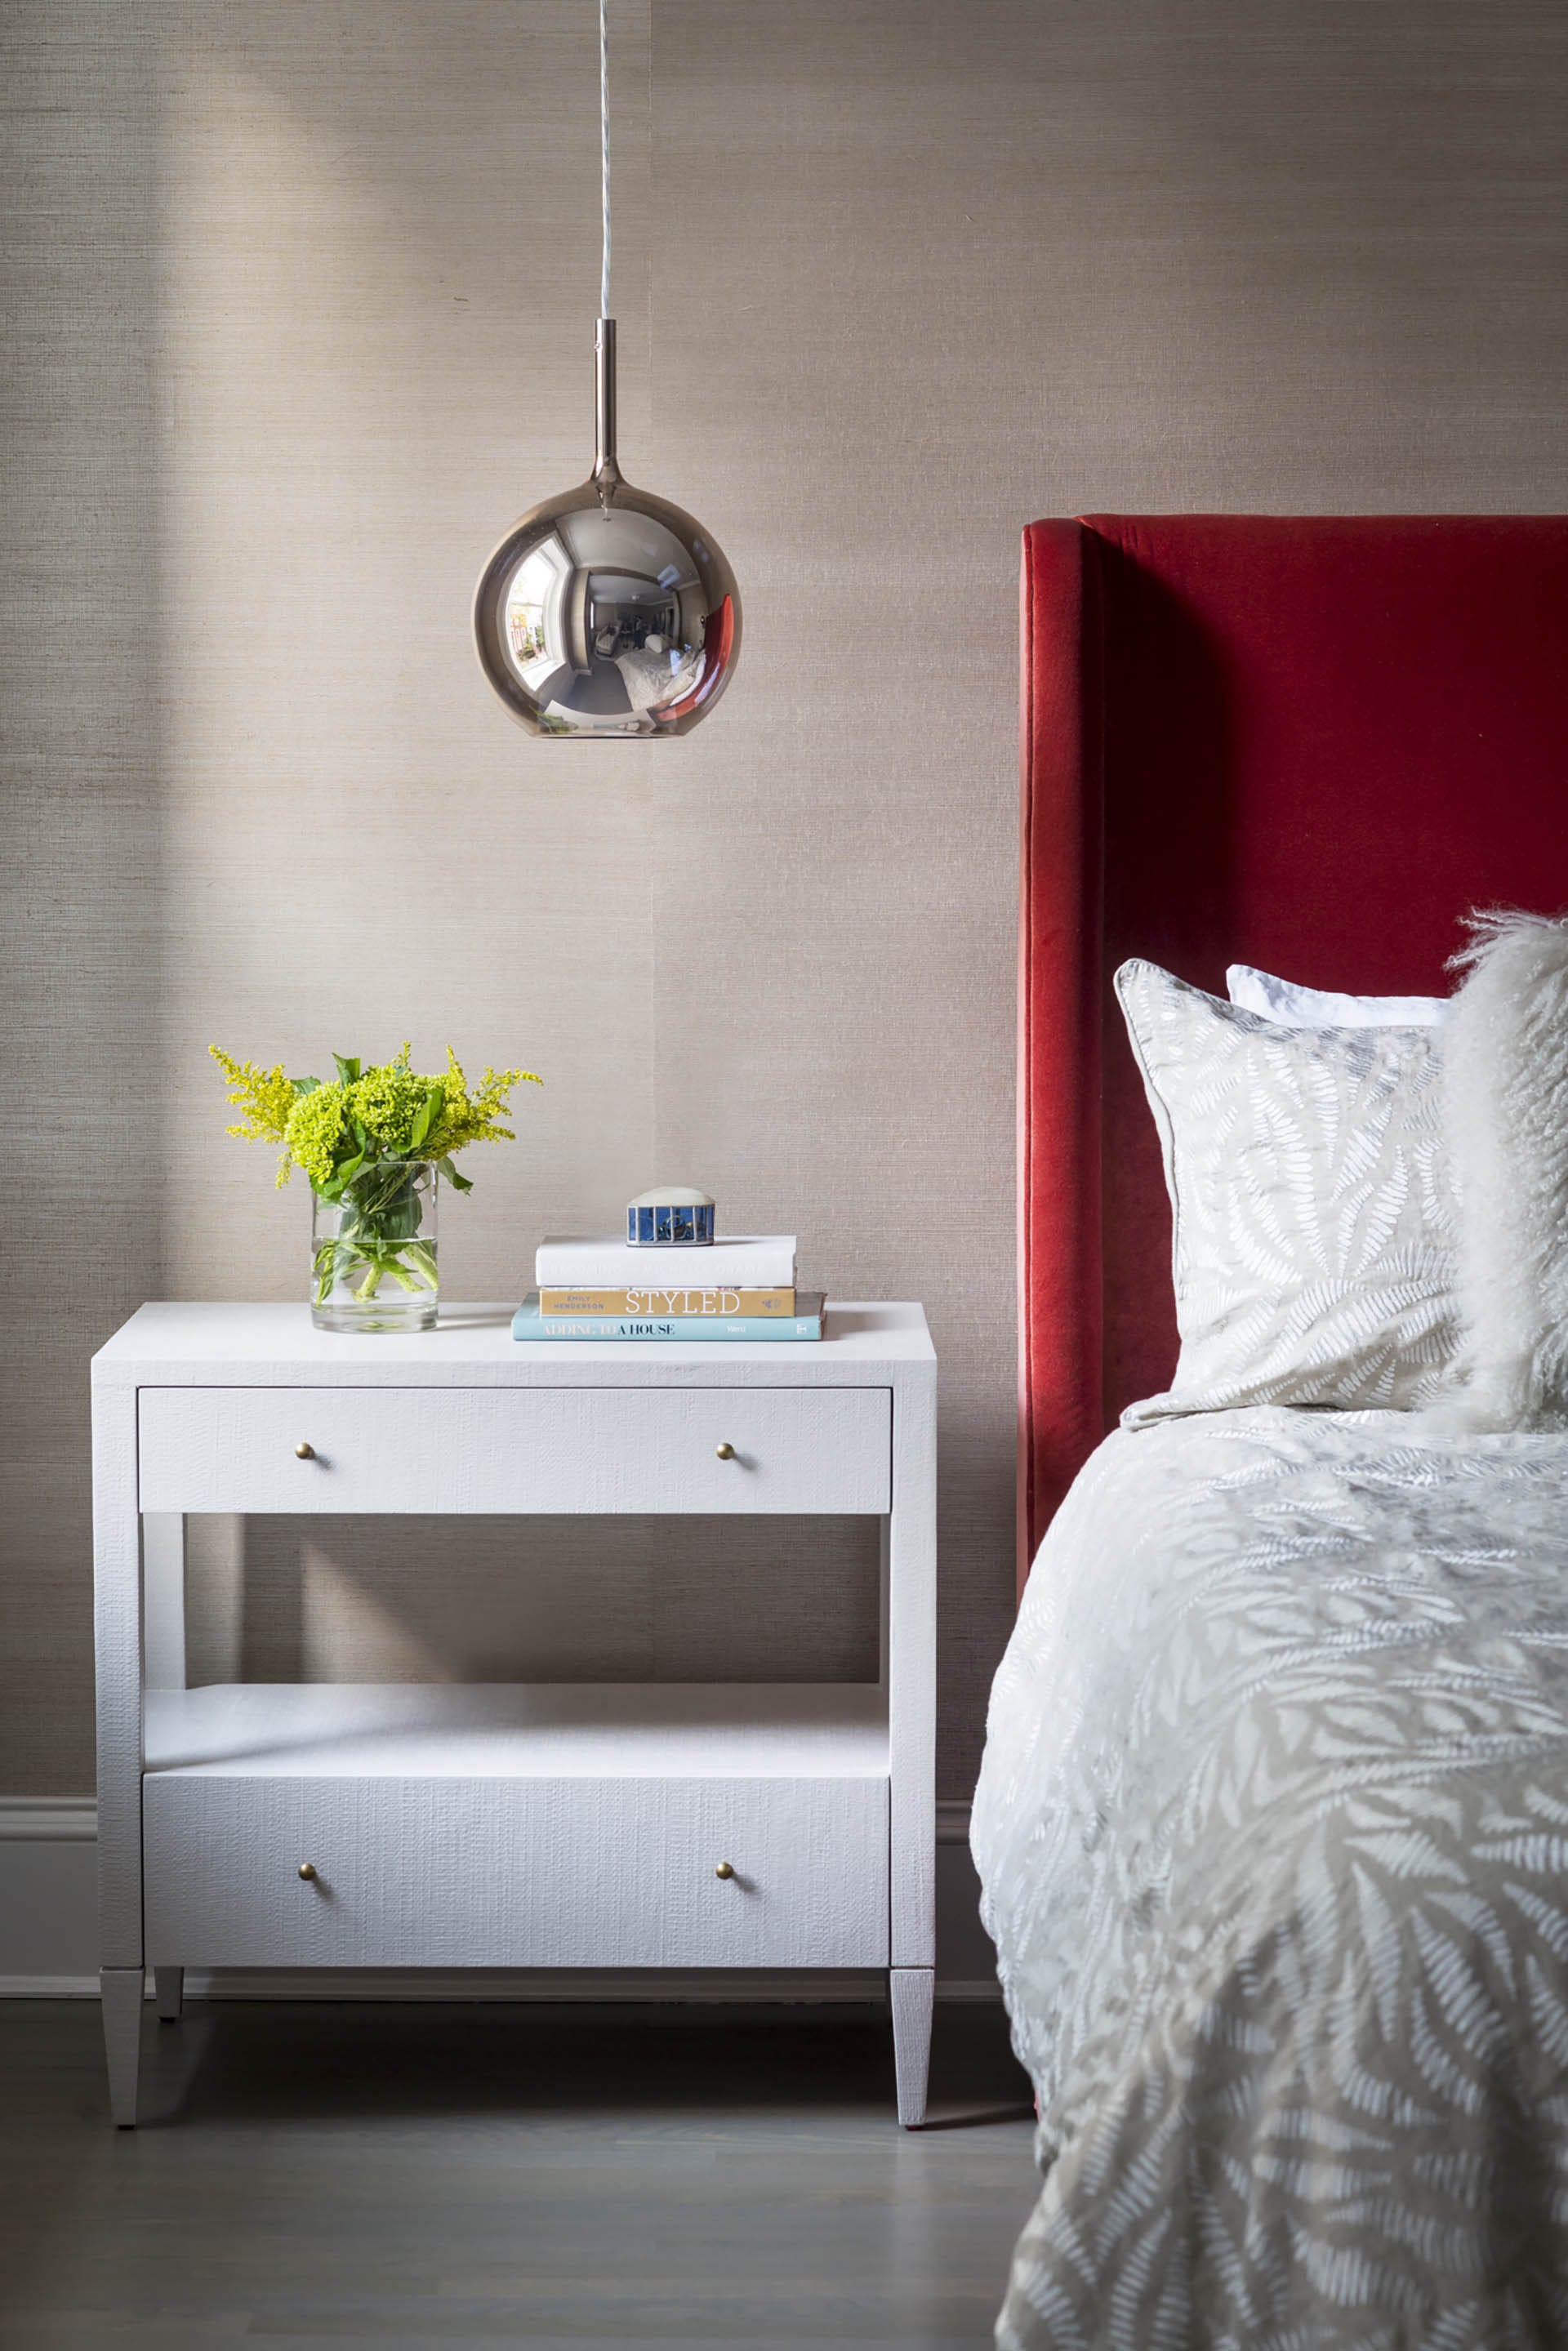 Primary bedroom with a rose-colored pendant light, grass cloth wallpaper, and red velvet upholstered headboard.